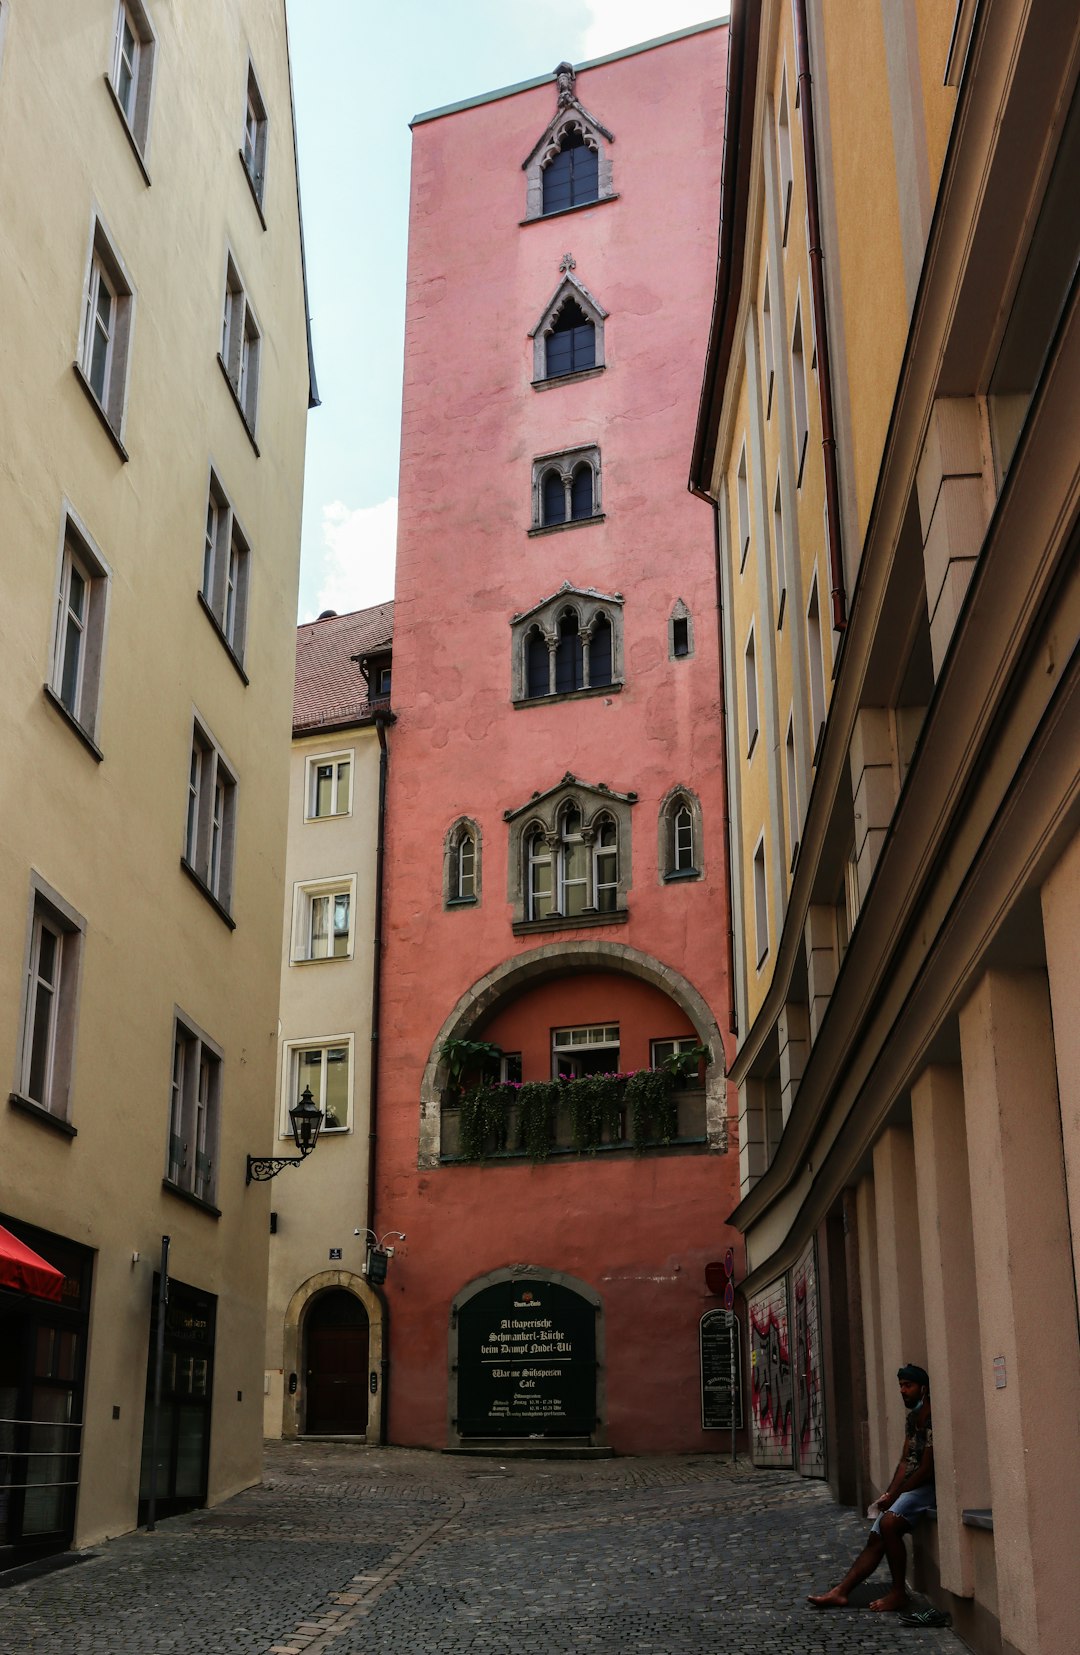 Travel Tips and Stories of Regensburg in Germany